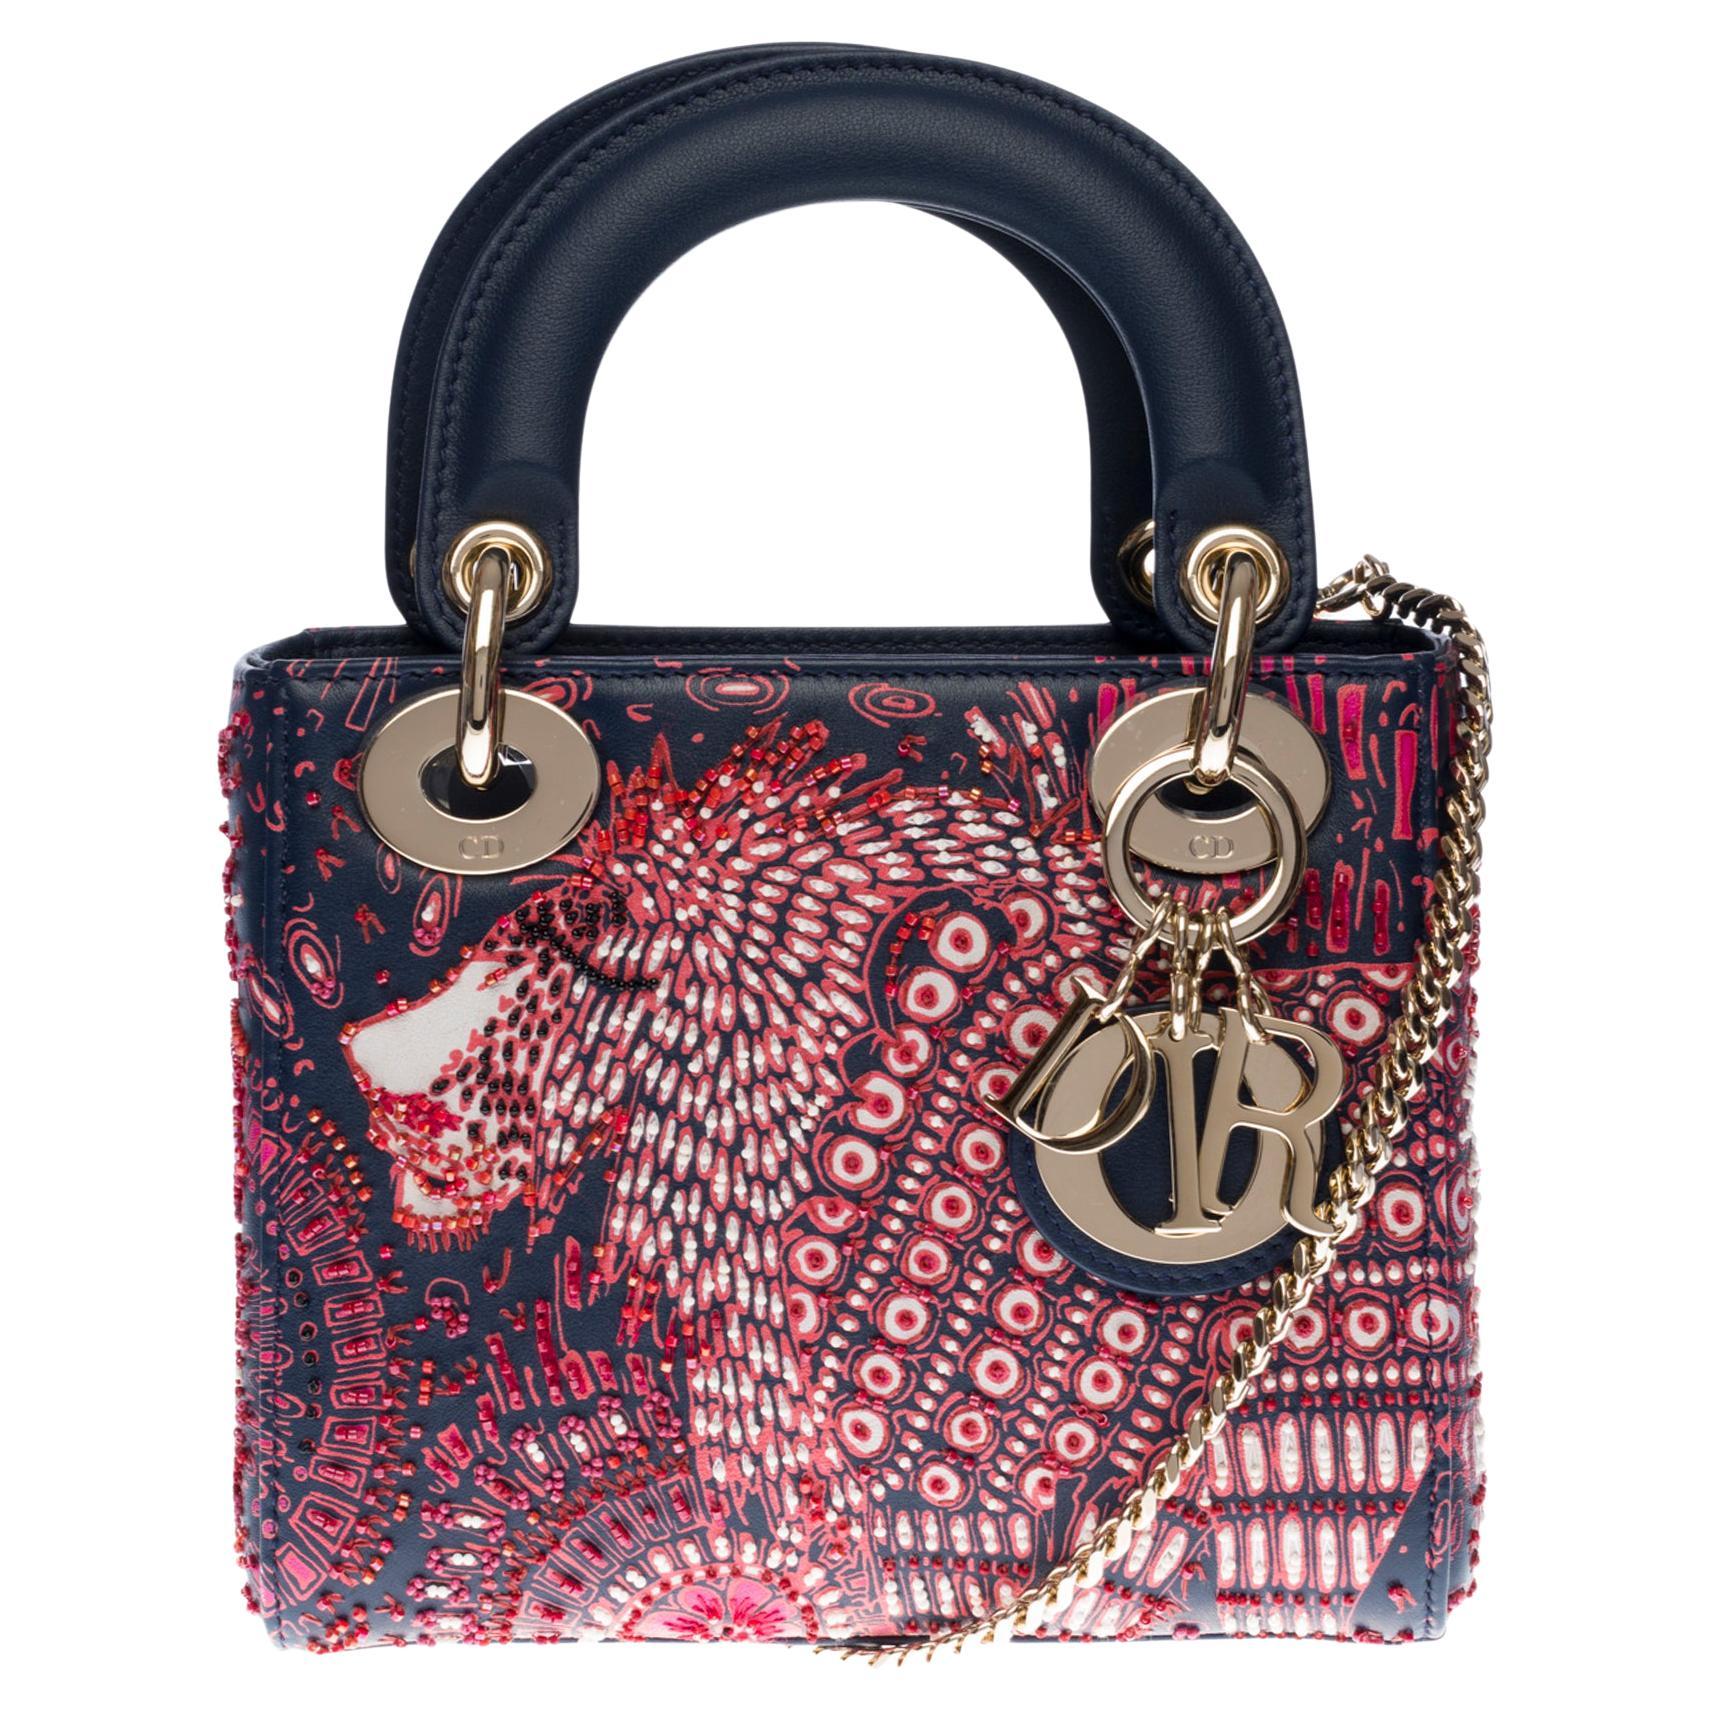 Marrakesh 2020 Limited Edition Lady Dior Mini in navy blue leather with beads 